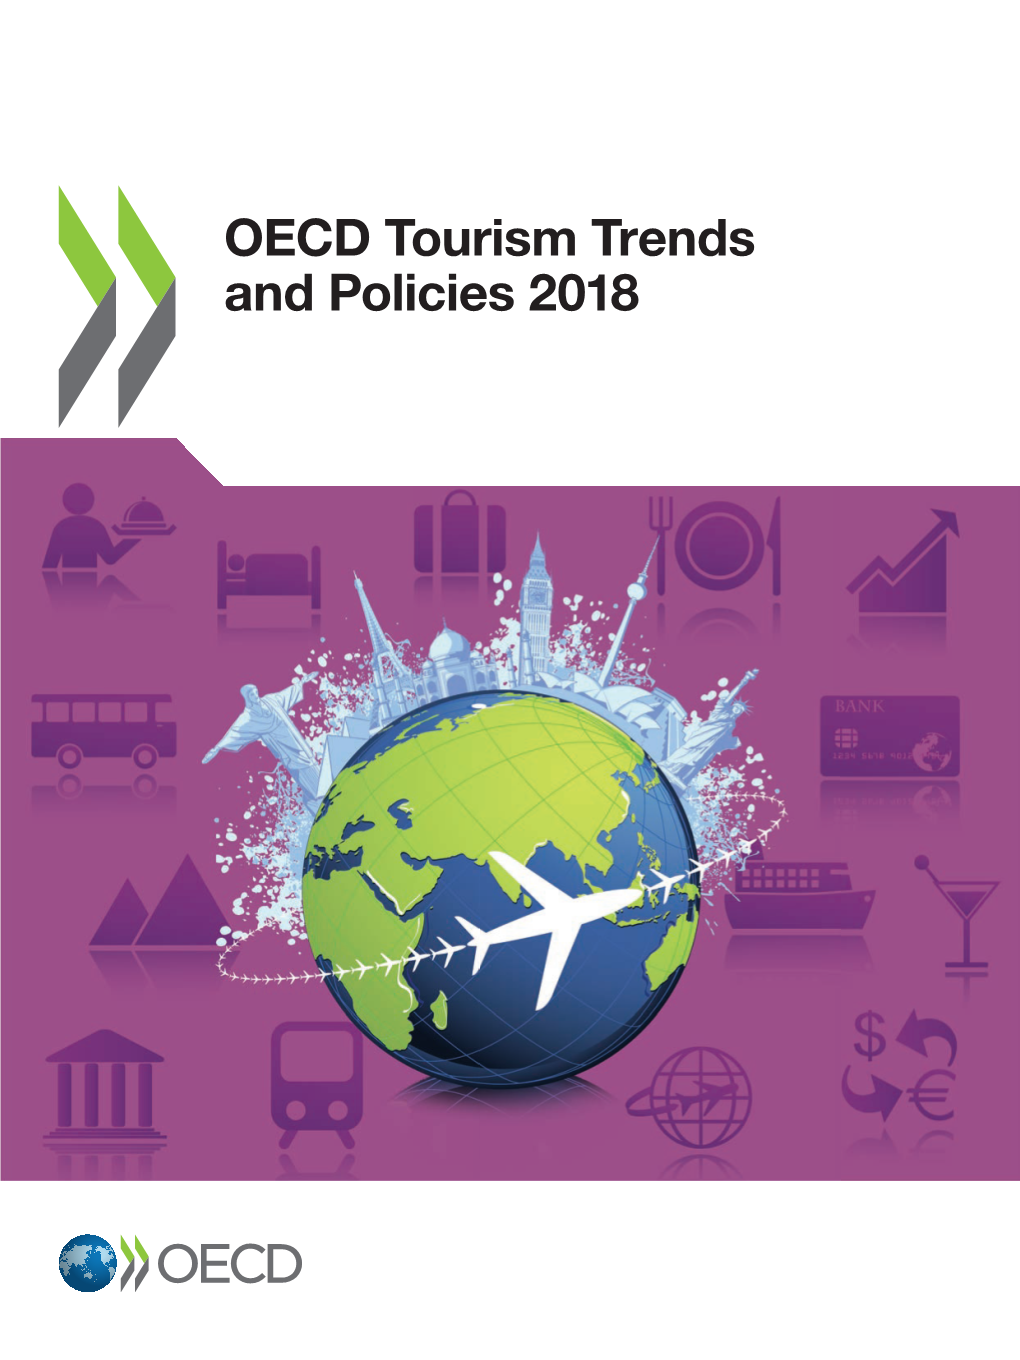 OECD Tourism Trends and Policies 2018 OECD Tourism Trends and Policies 2018 Policies and Trends Tourism OECD